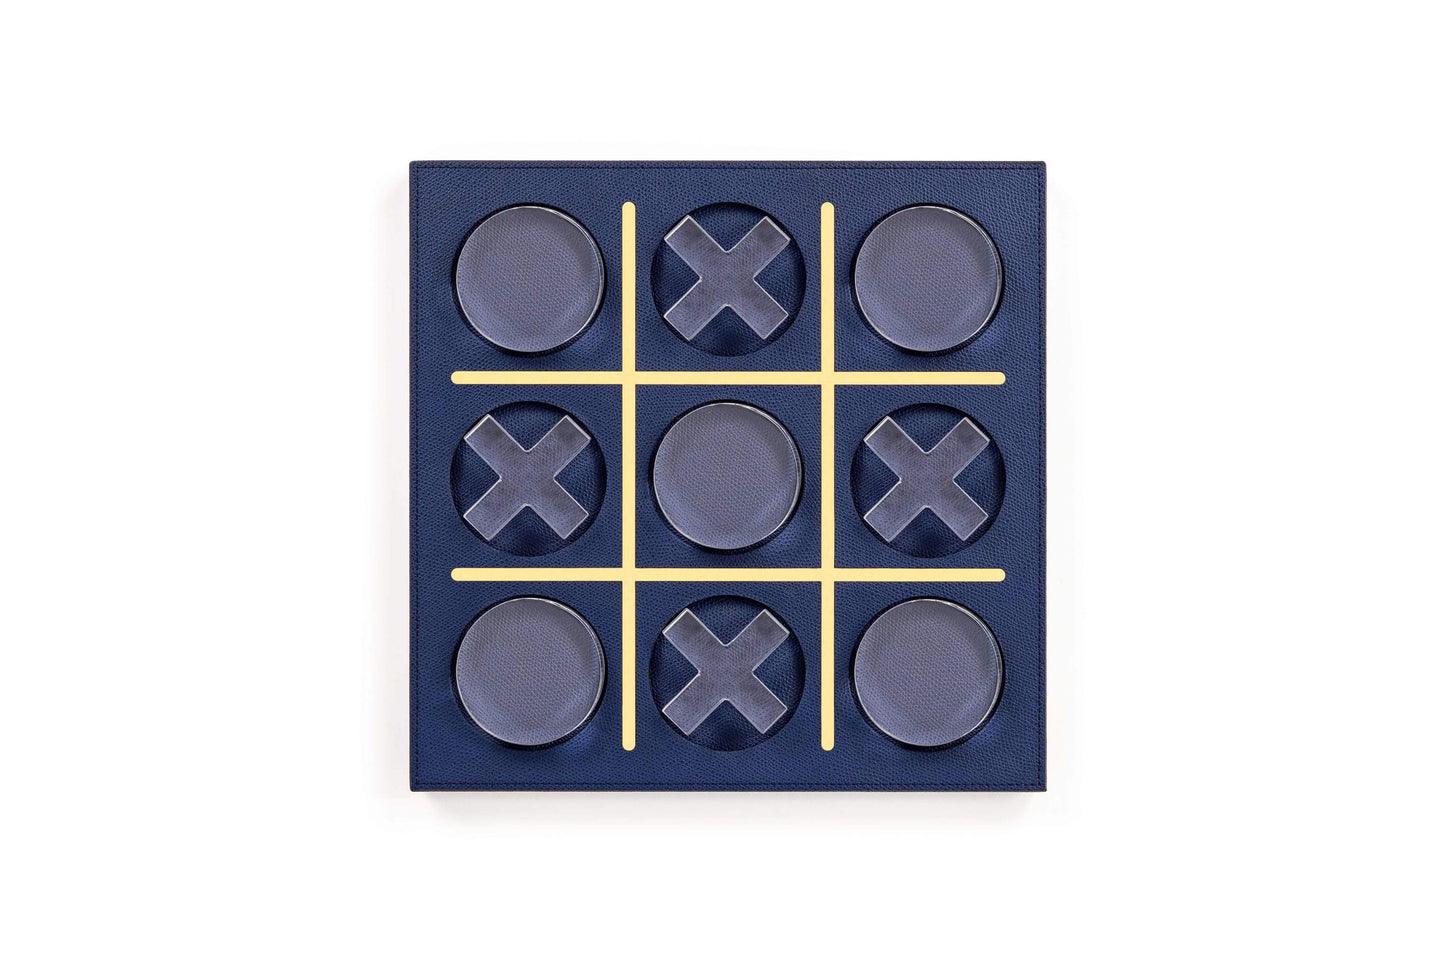 Pinetti Boston Wood and Leather Tic Tac Toe Set | Crafted with Fine Wood and Luxurious Leather | Elegant Design Adds Style to Any Setting | Perfect for Leisure and Entertainment | Explore a Range of Luxury Home Accessories at 2Jour Concierge, #1 luxury high-end gift & lifestyle shop